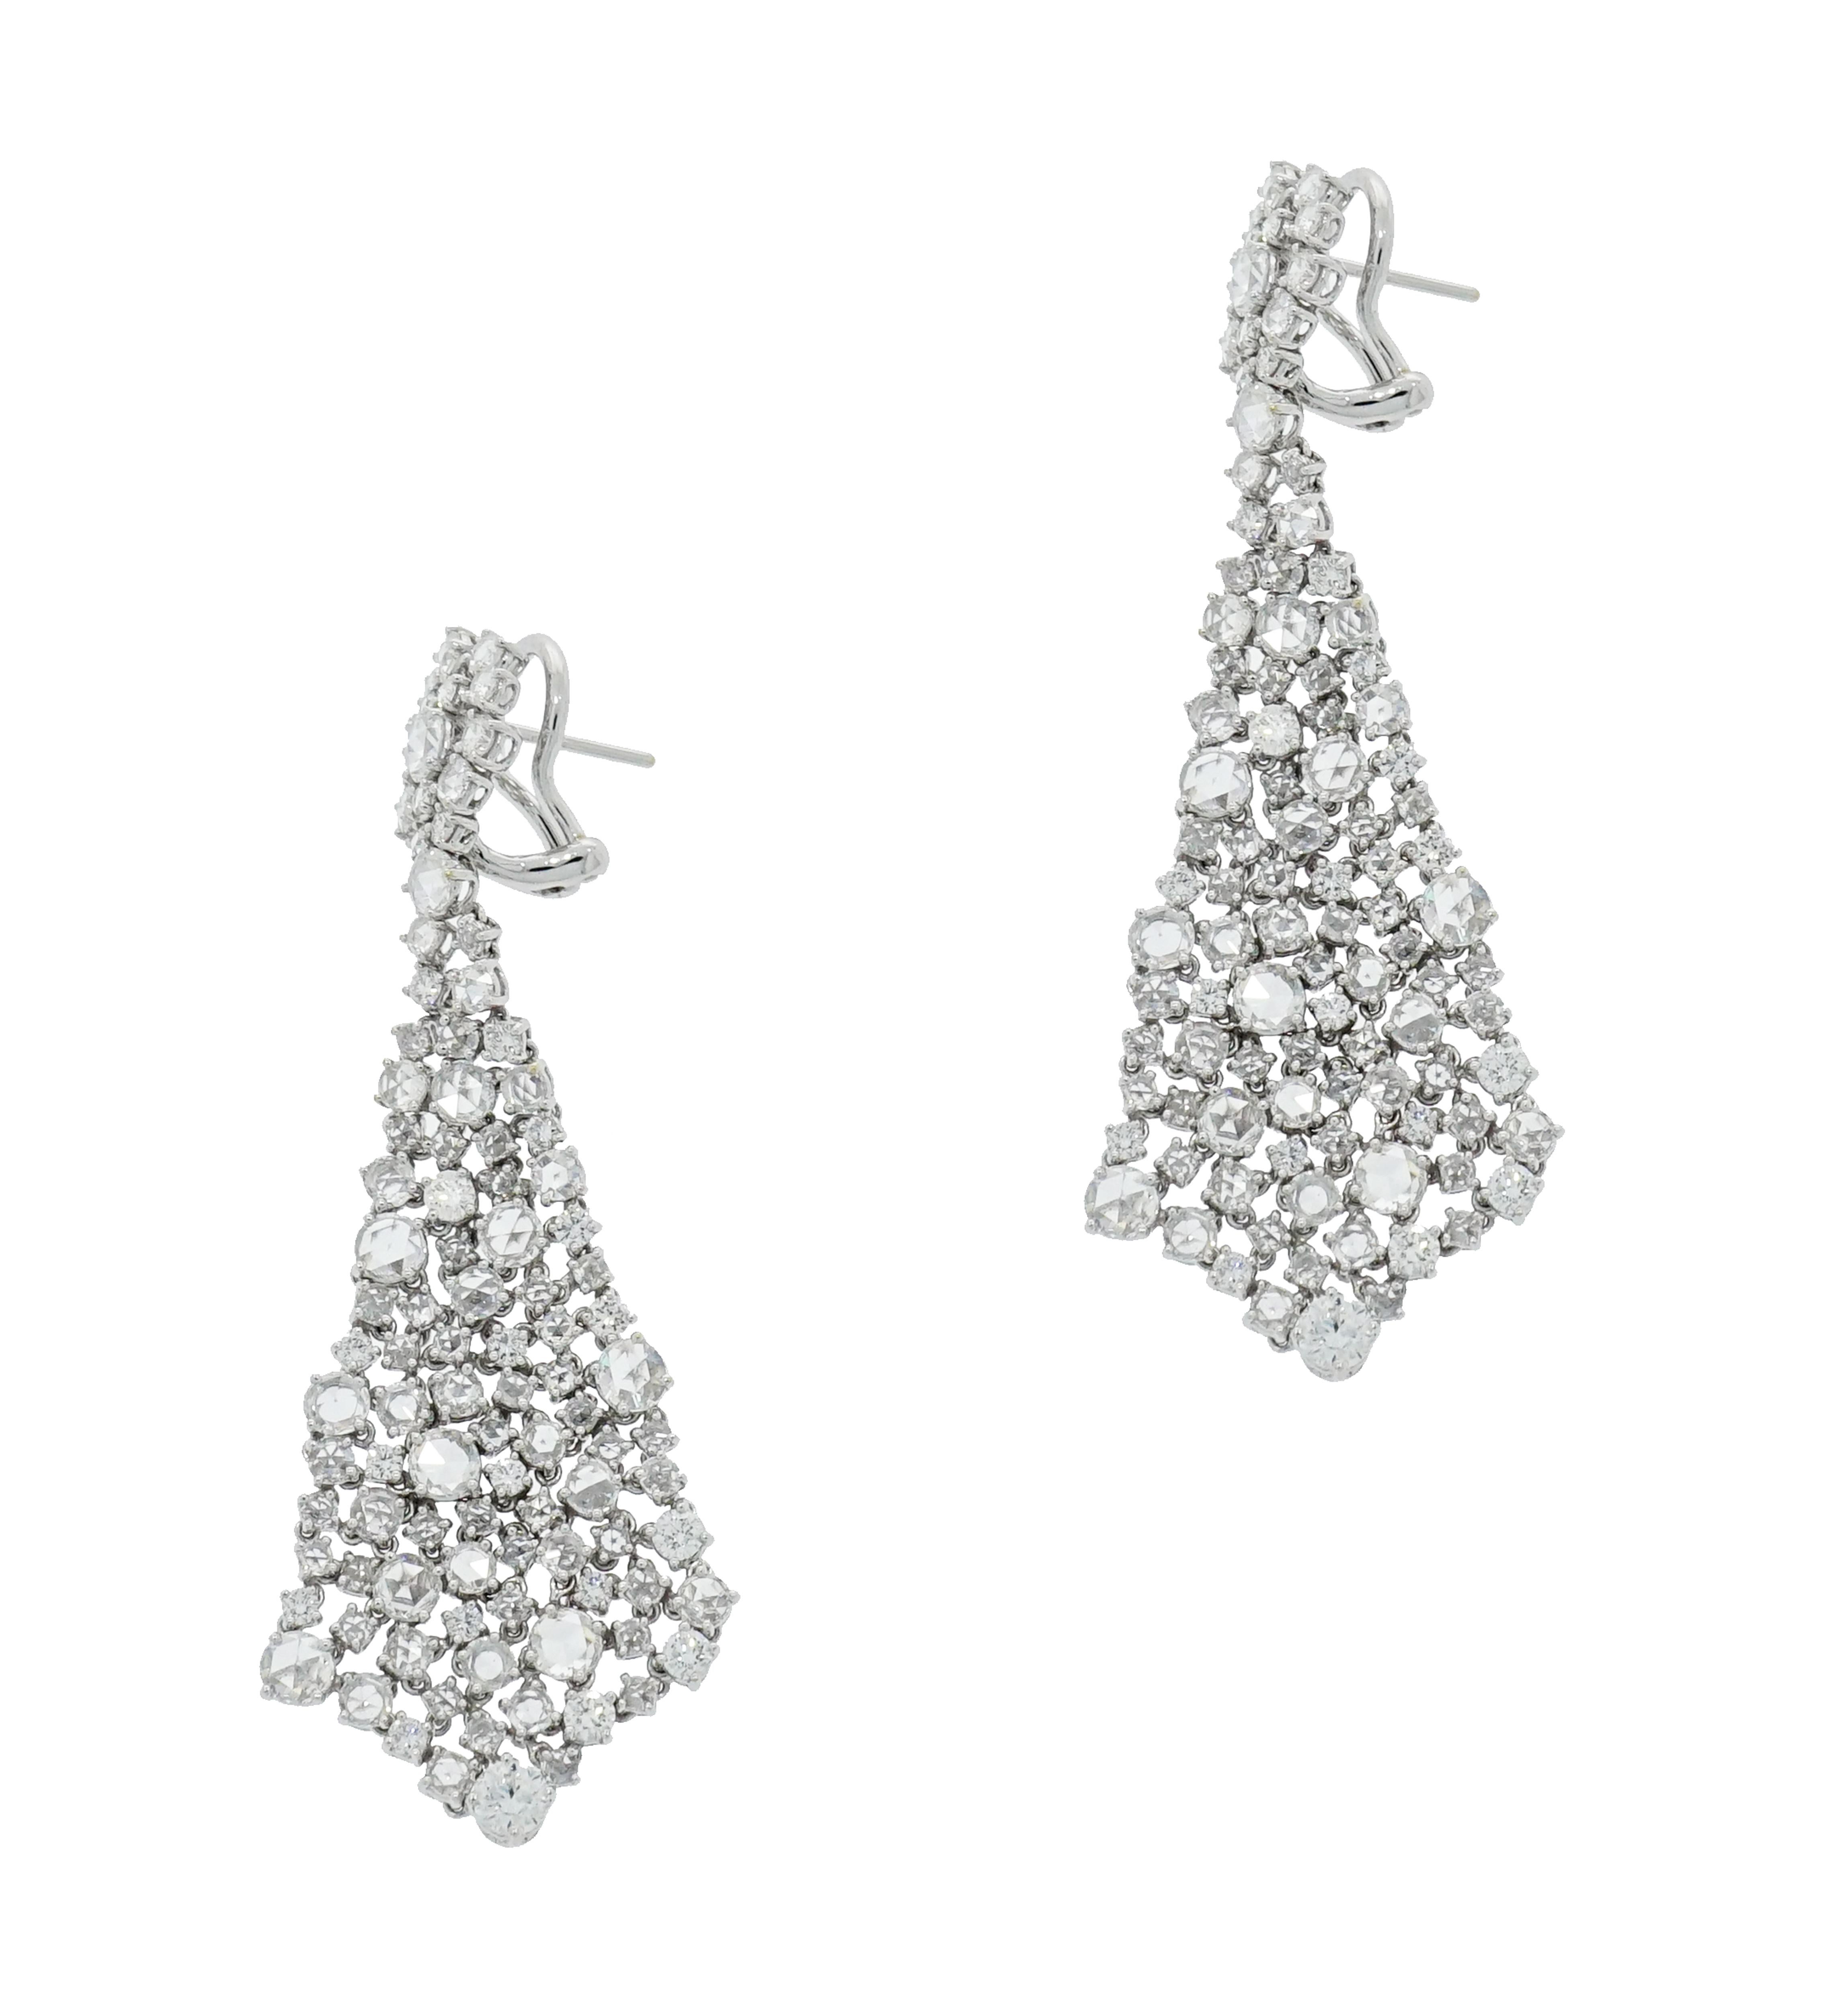 Spring is here and sparkles are in full bloom!!!
This gorgeous chandelier earrings is set with 9.54 carats of rose cut diamonds and accented with round brilliant cut diamonds in a fluid handmade 18k white gold setting.
The earrings have an omega